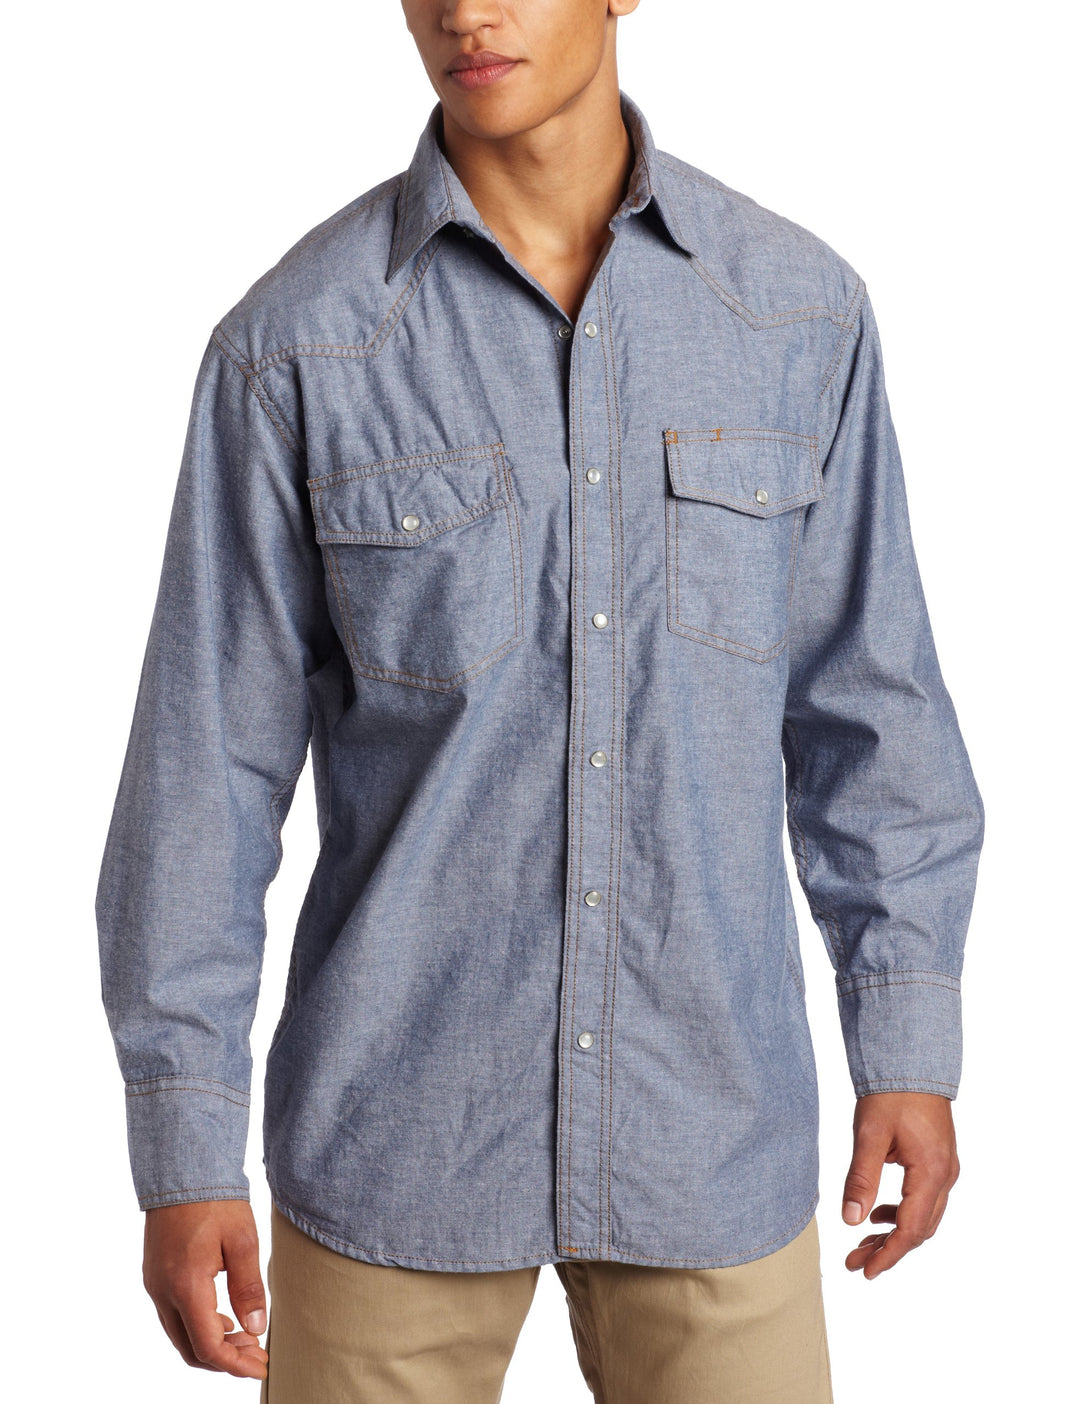 Pre-Washed Long-Sleeve Chambray Western Shirt